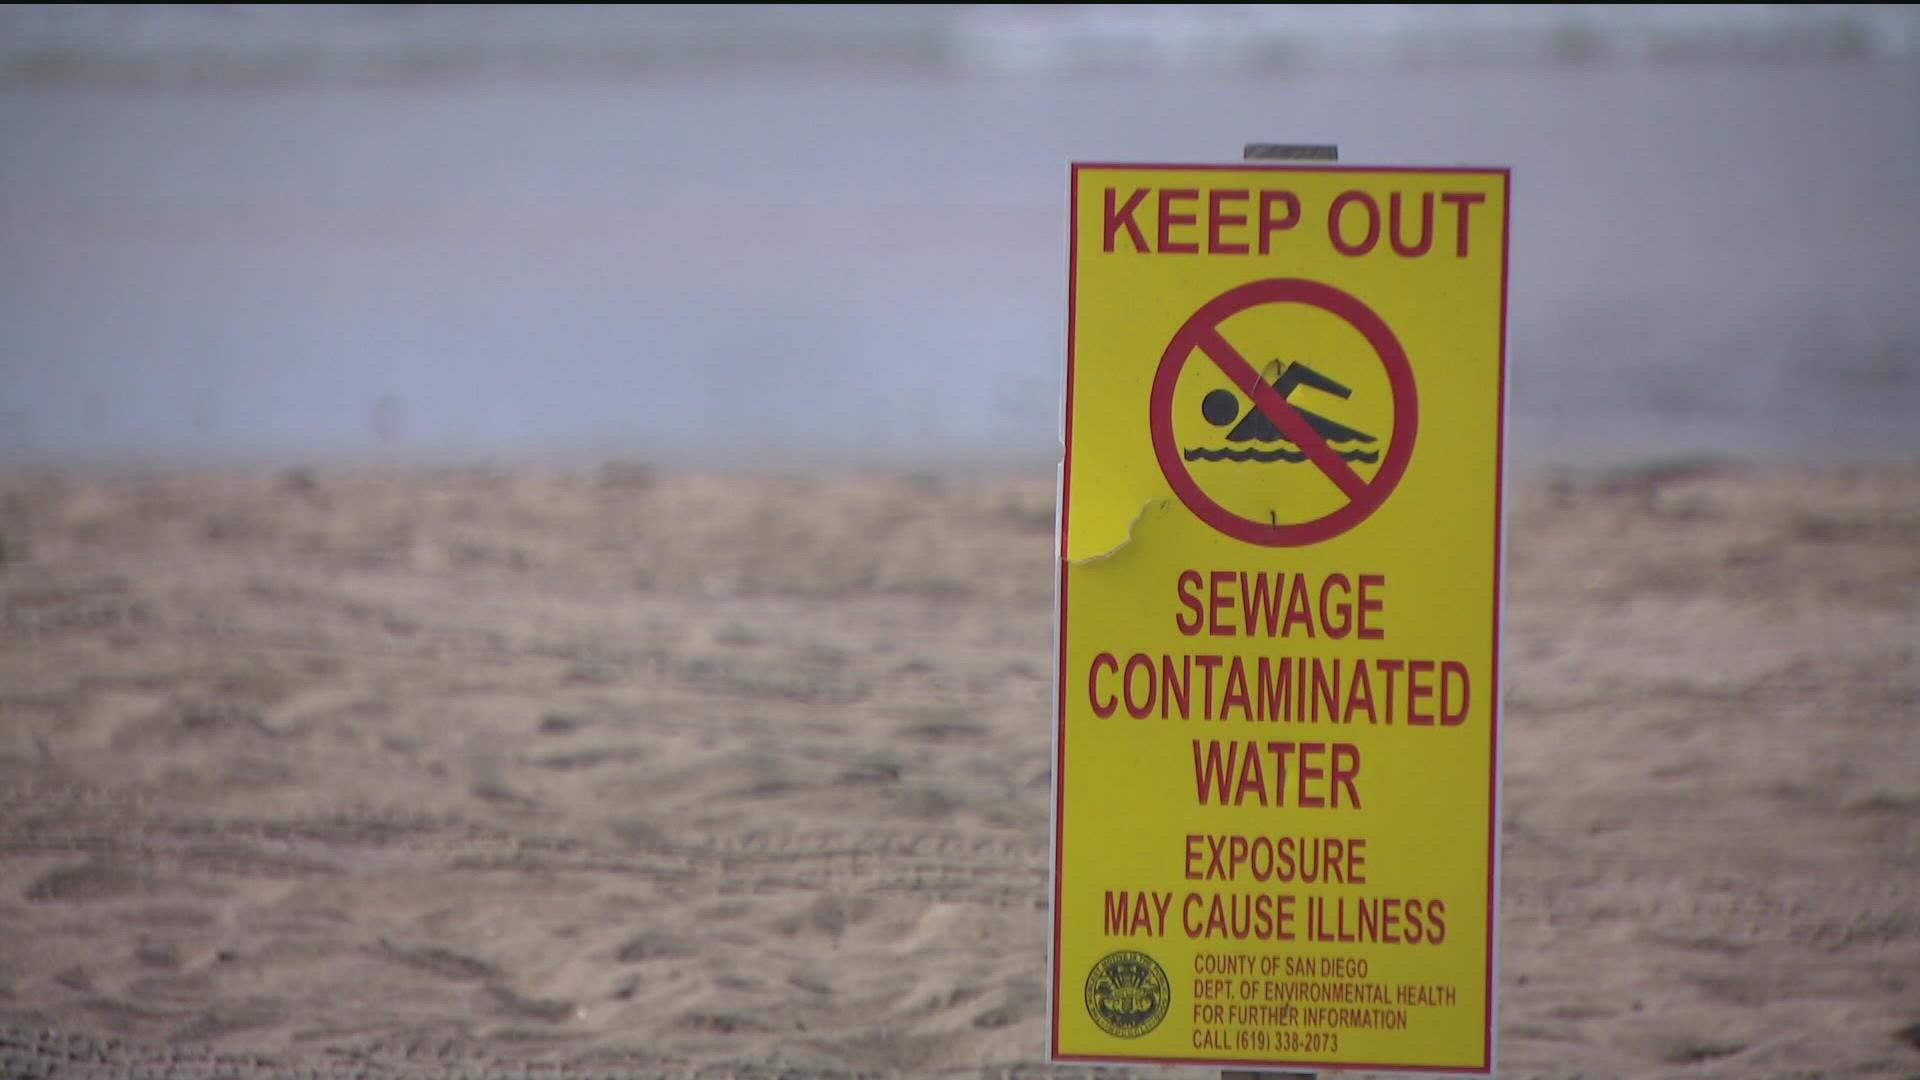 The county implemented a new DNA based water testing system for water pollution. It's supposed to detect bacteria faster, but has resulted in more beach closures.